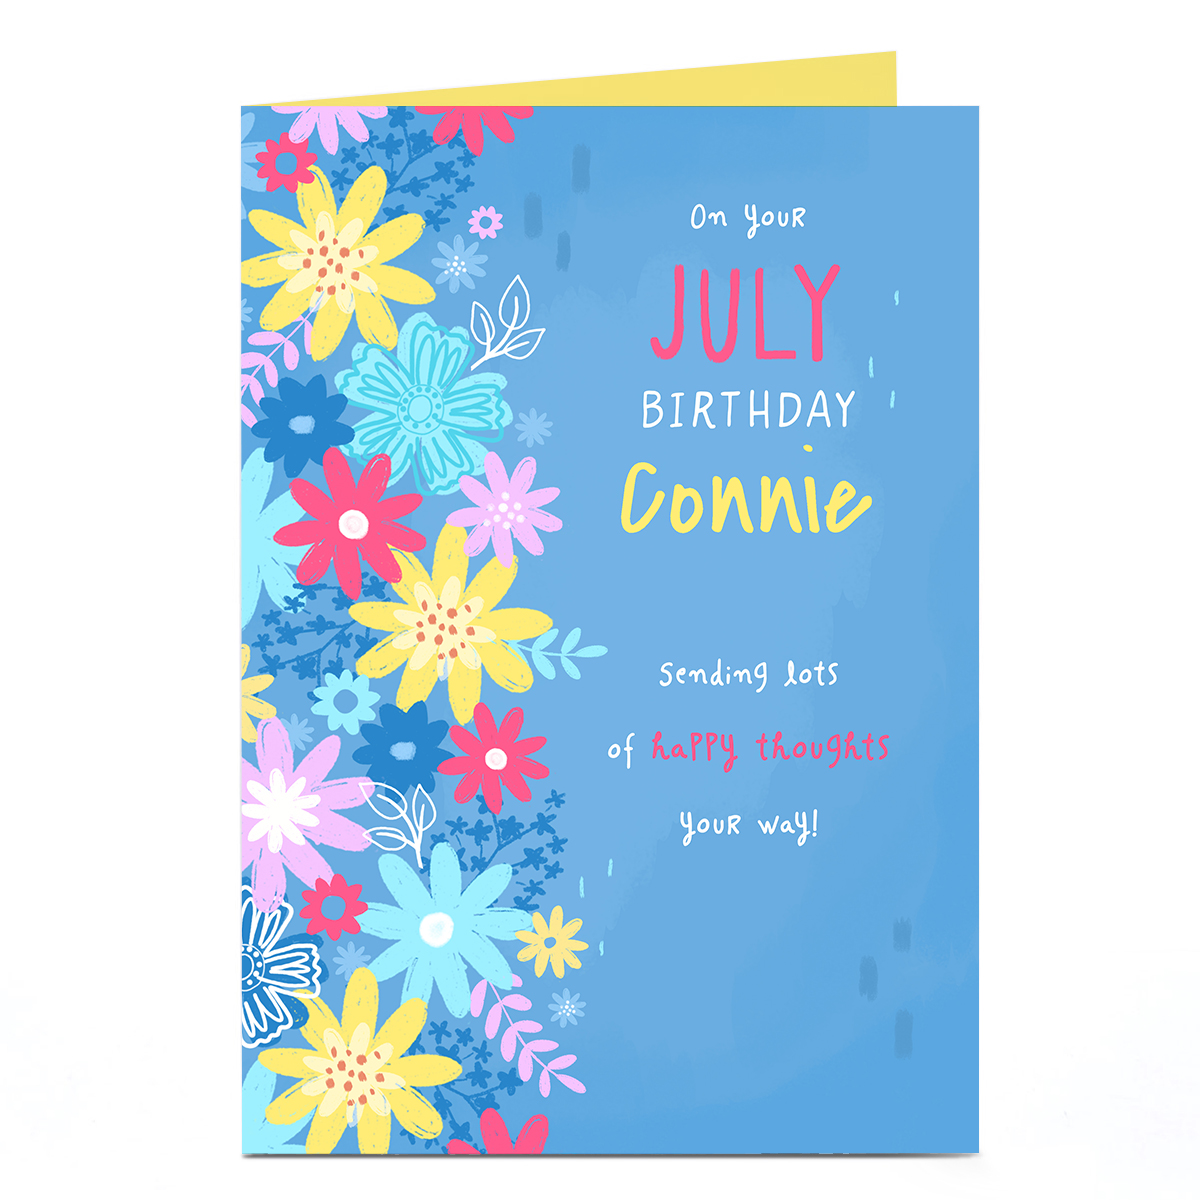 Personalised Birthday Card - July Birthday Happy Thoughts